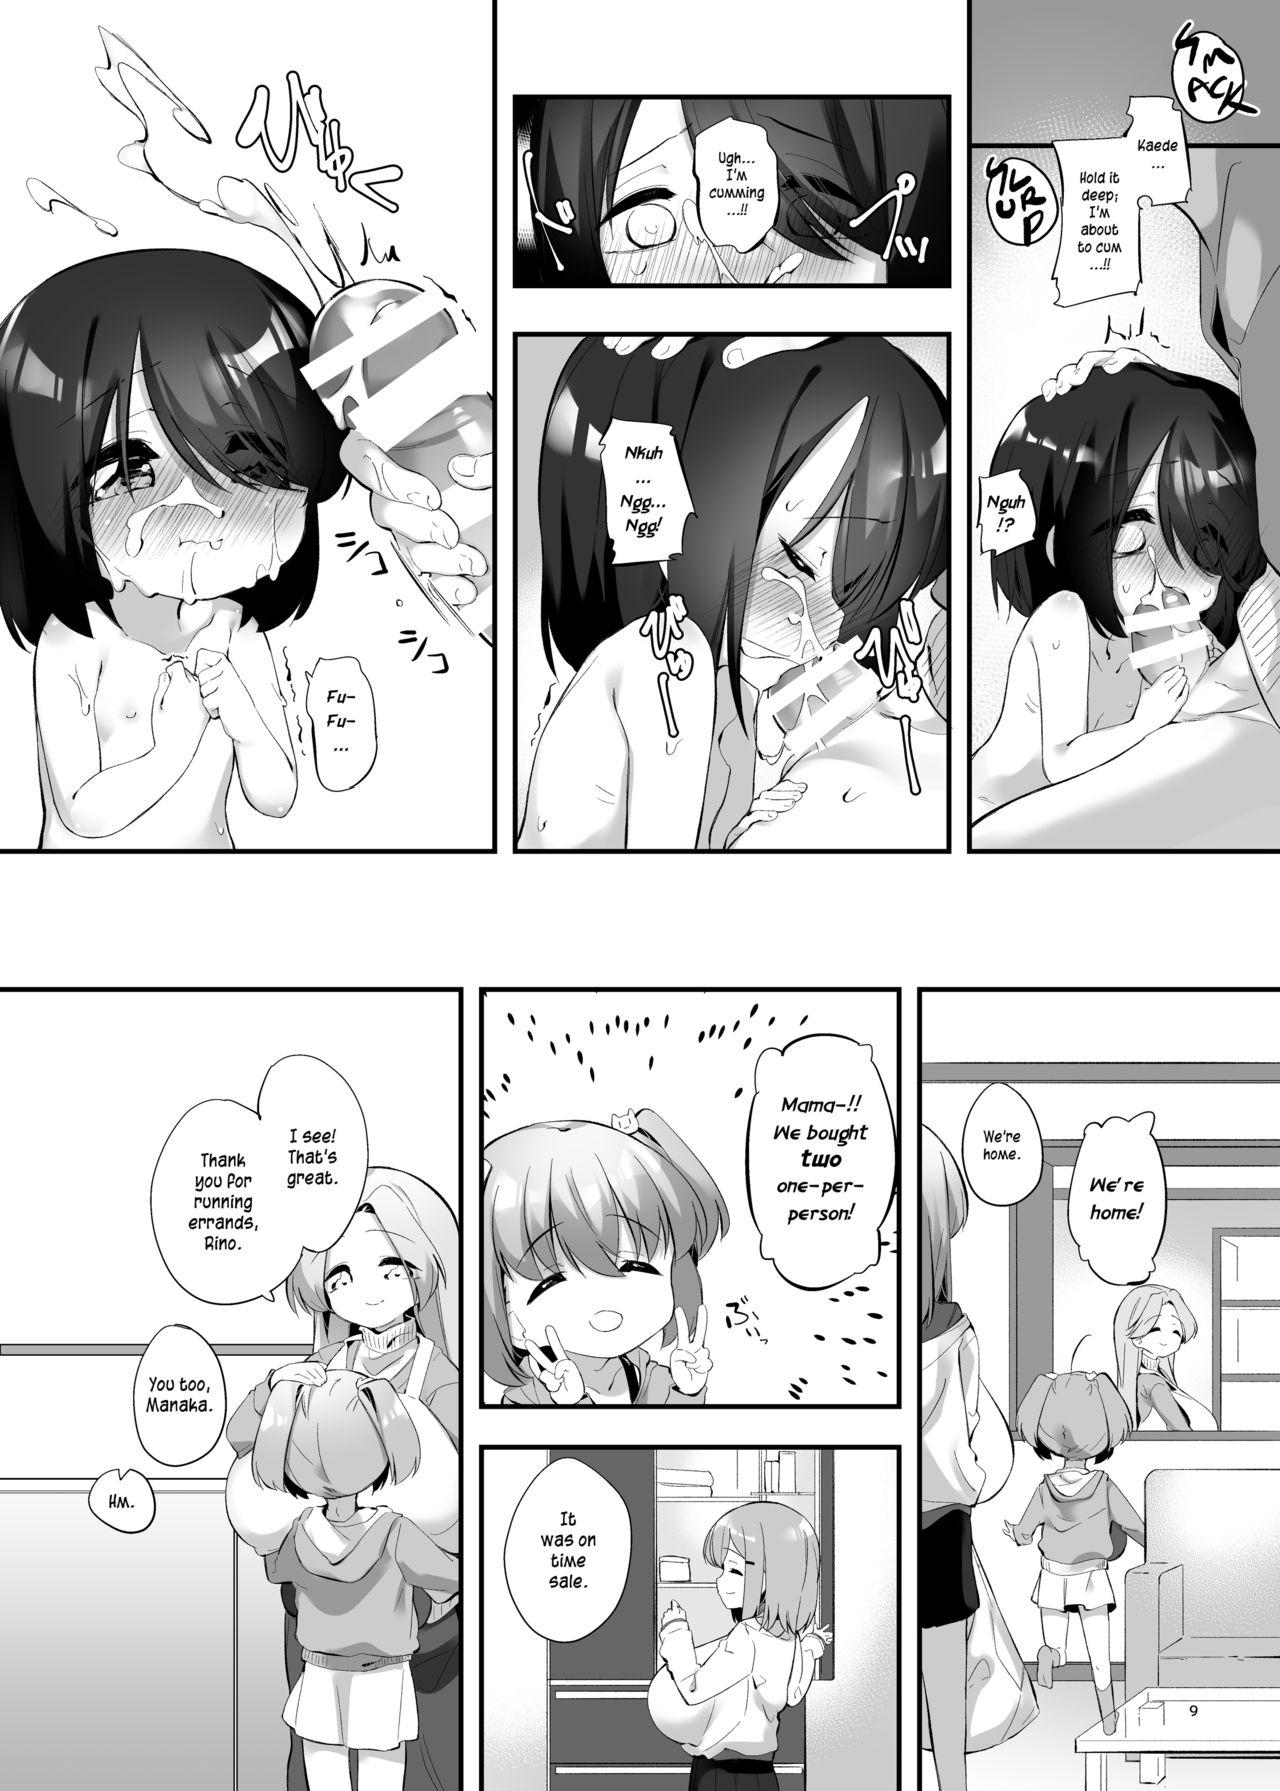 Rope Imouto ni Hasamarete Shiawase Desho? 3 | Between Sisters, Are You Happy? 3 - Original Free 18 Year Old Porn - Page 8